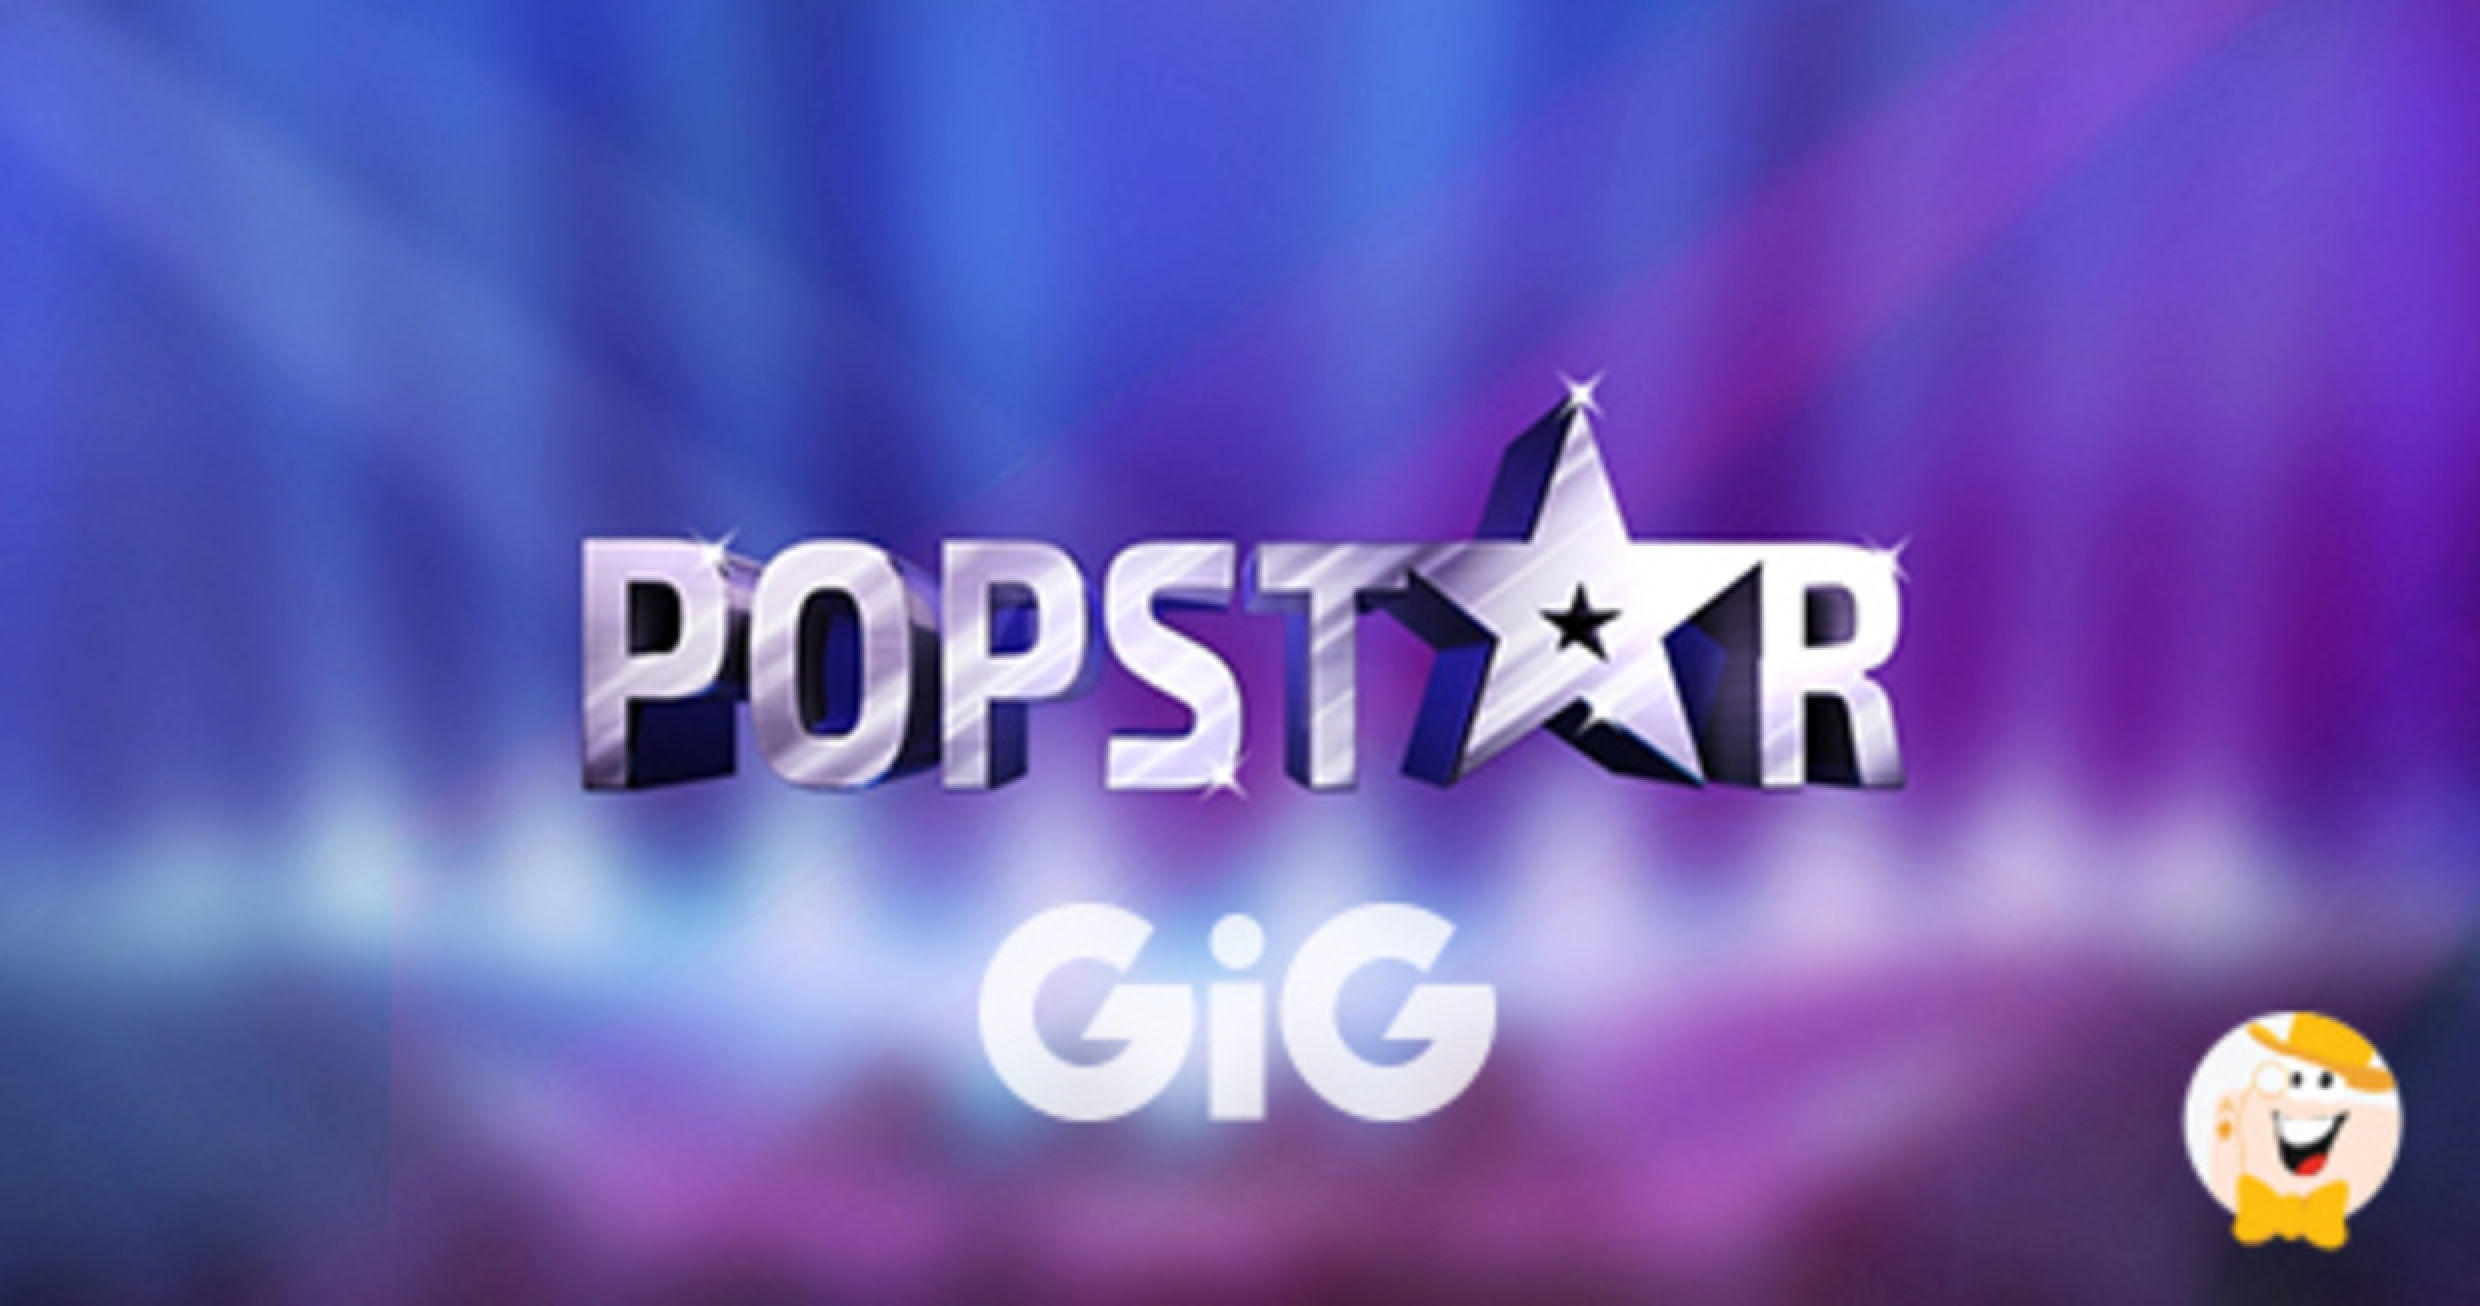 The Popstar Online Slot Demo Game by Spearhead Studios